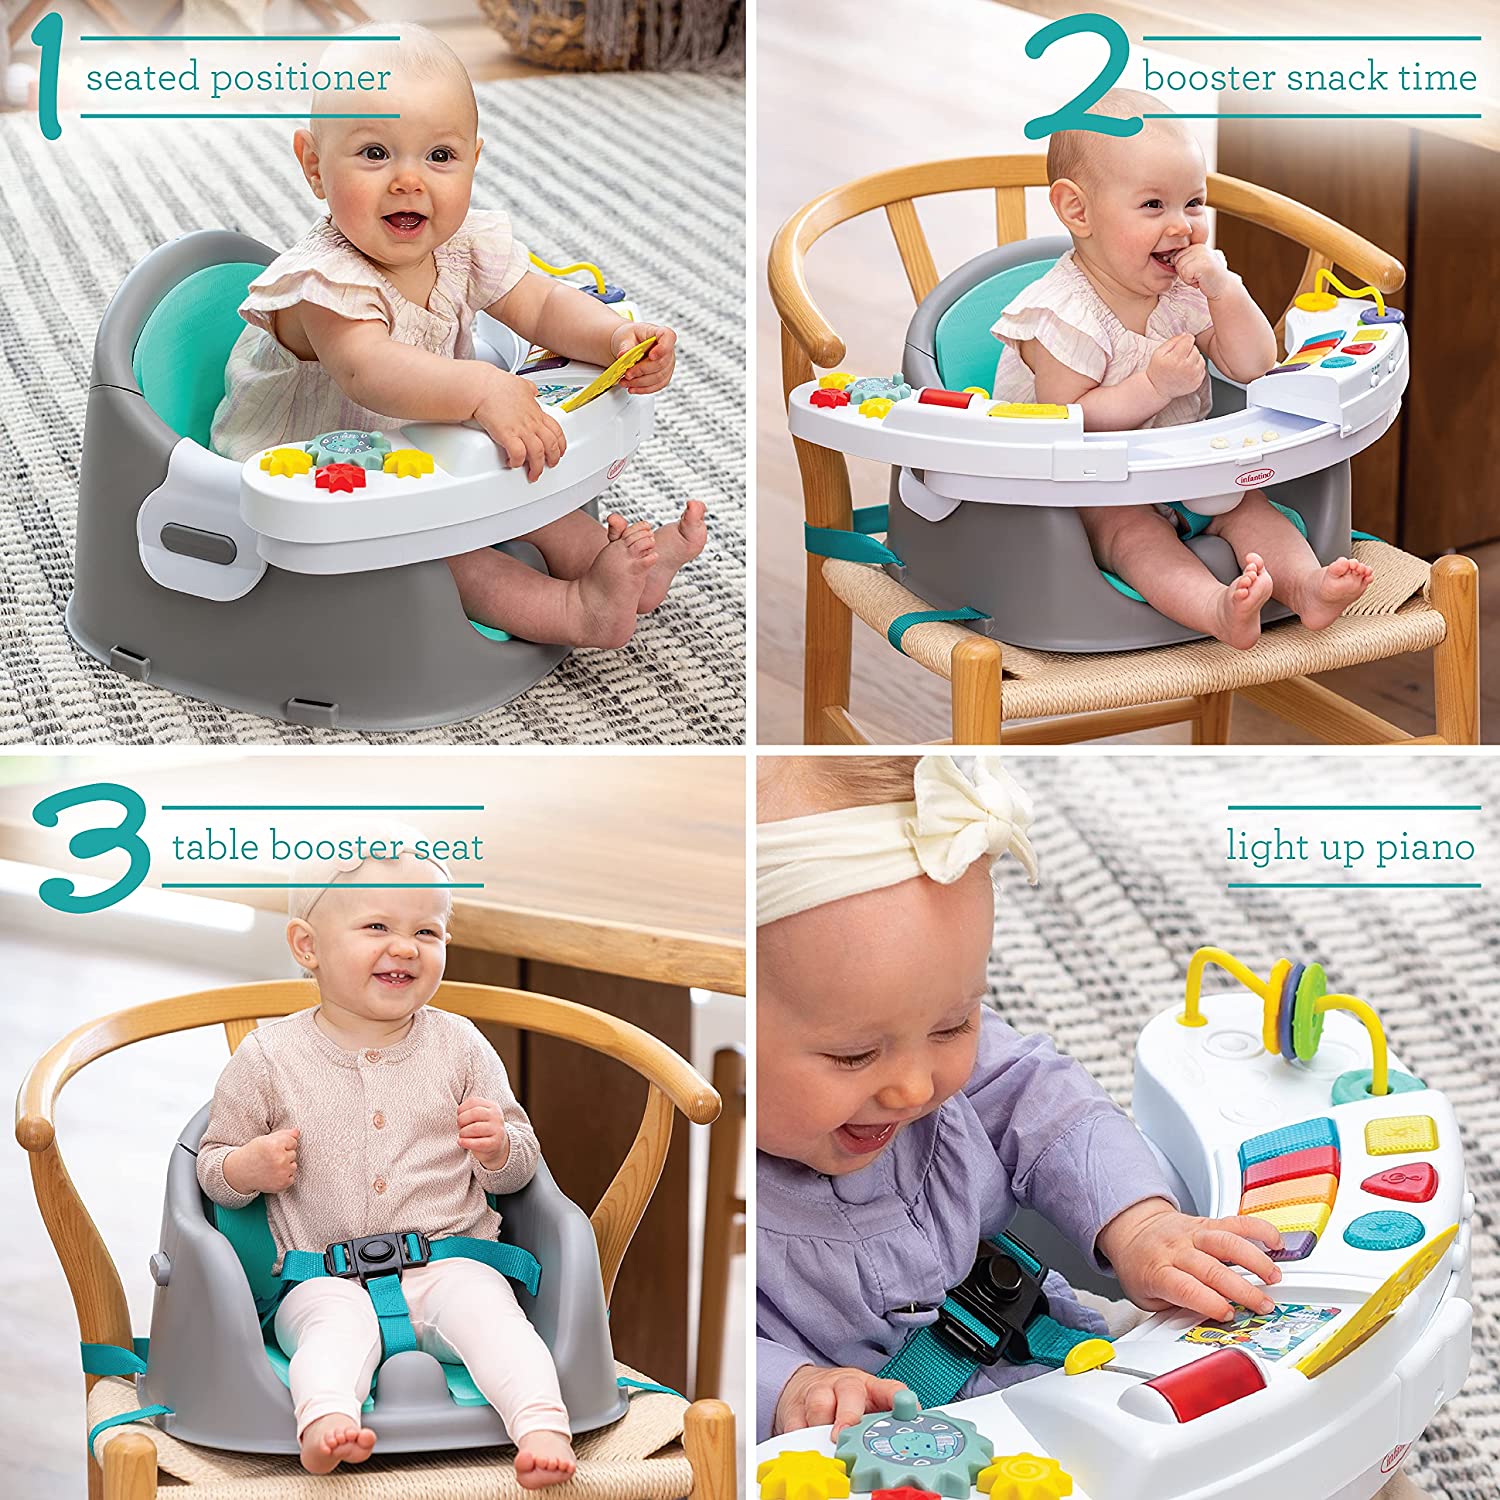 3. Infantino Music & Lights 3-In-1 Infant Activity Seat 